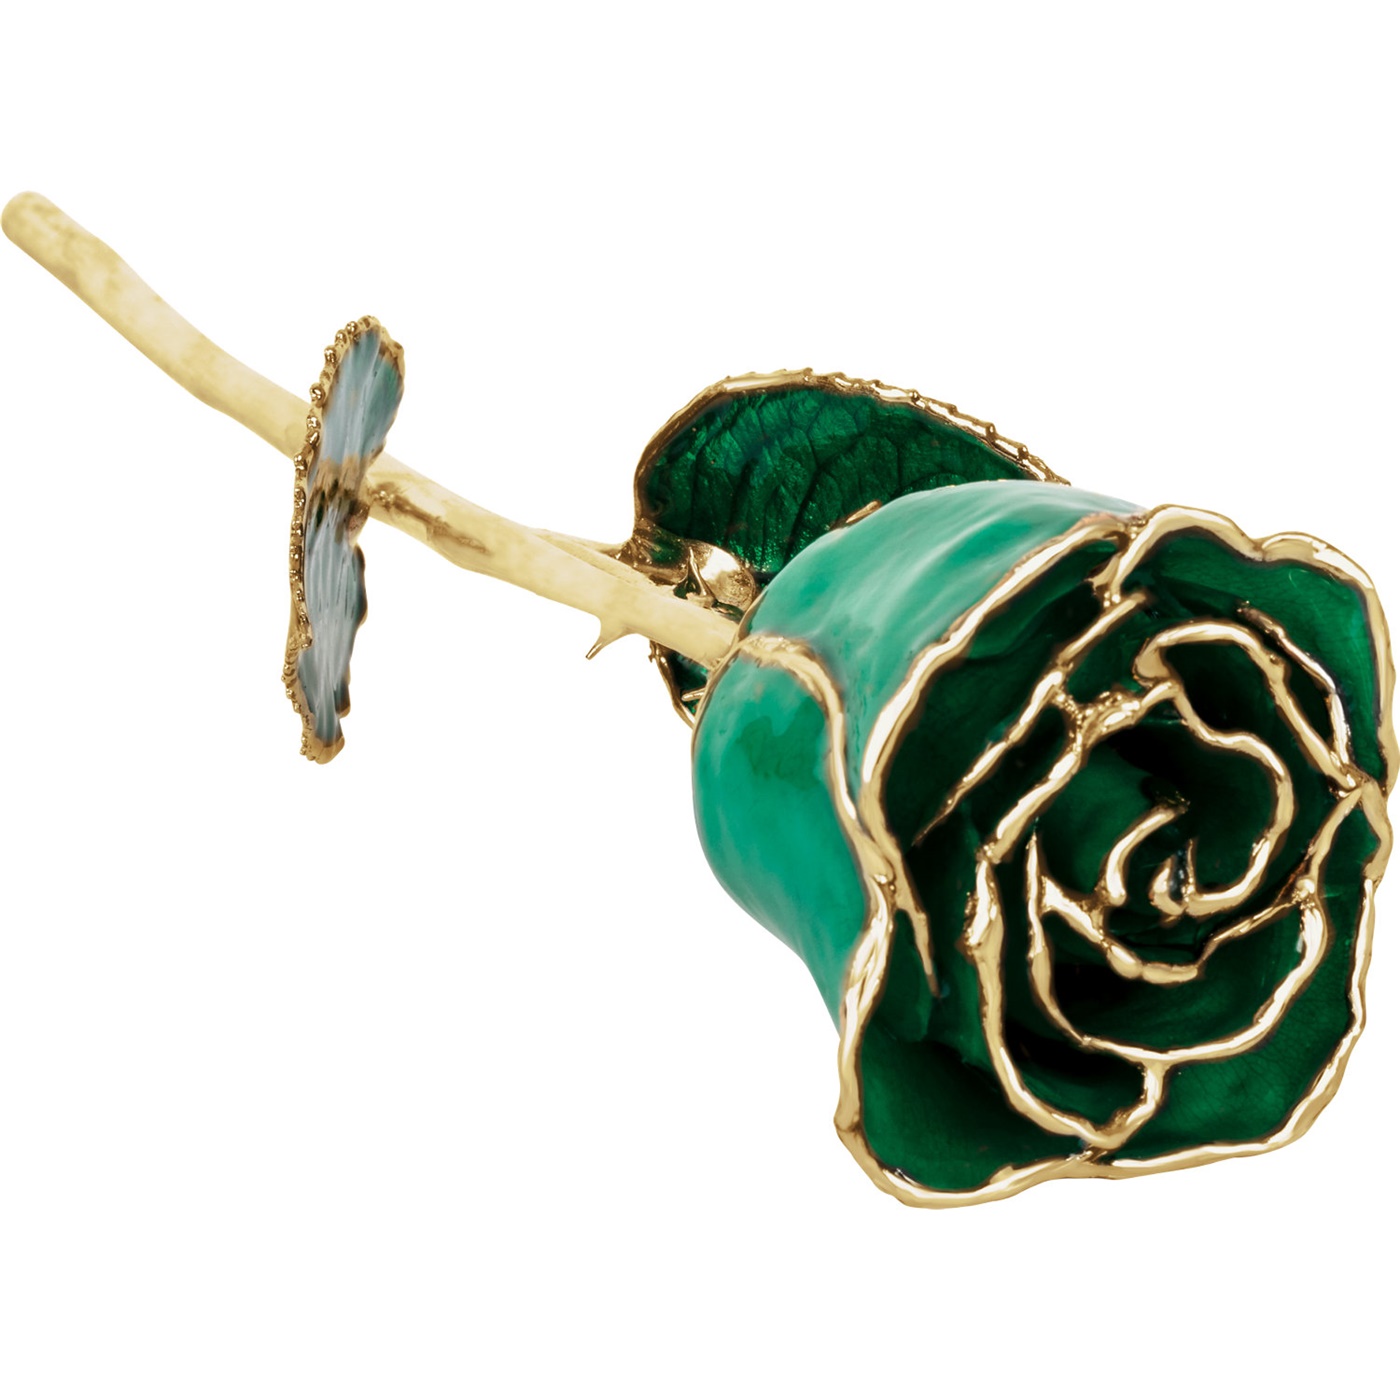 Featured image of post 24K Gold Dipped Roses While gold roses are our specialty we carry many other natural products that have been preserved and plated with 24k gold and other precious metals